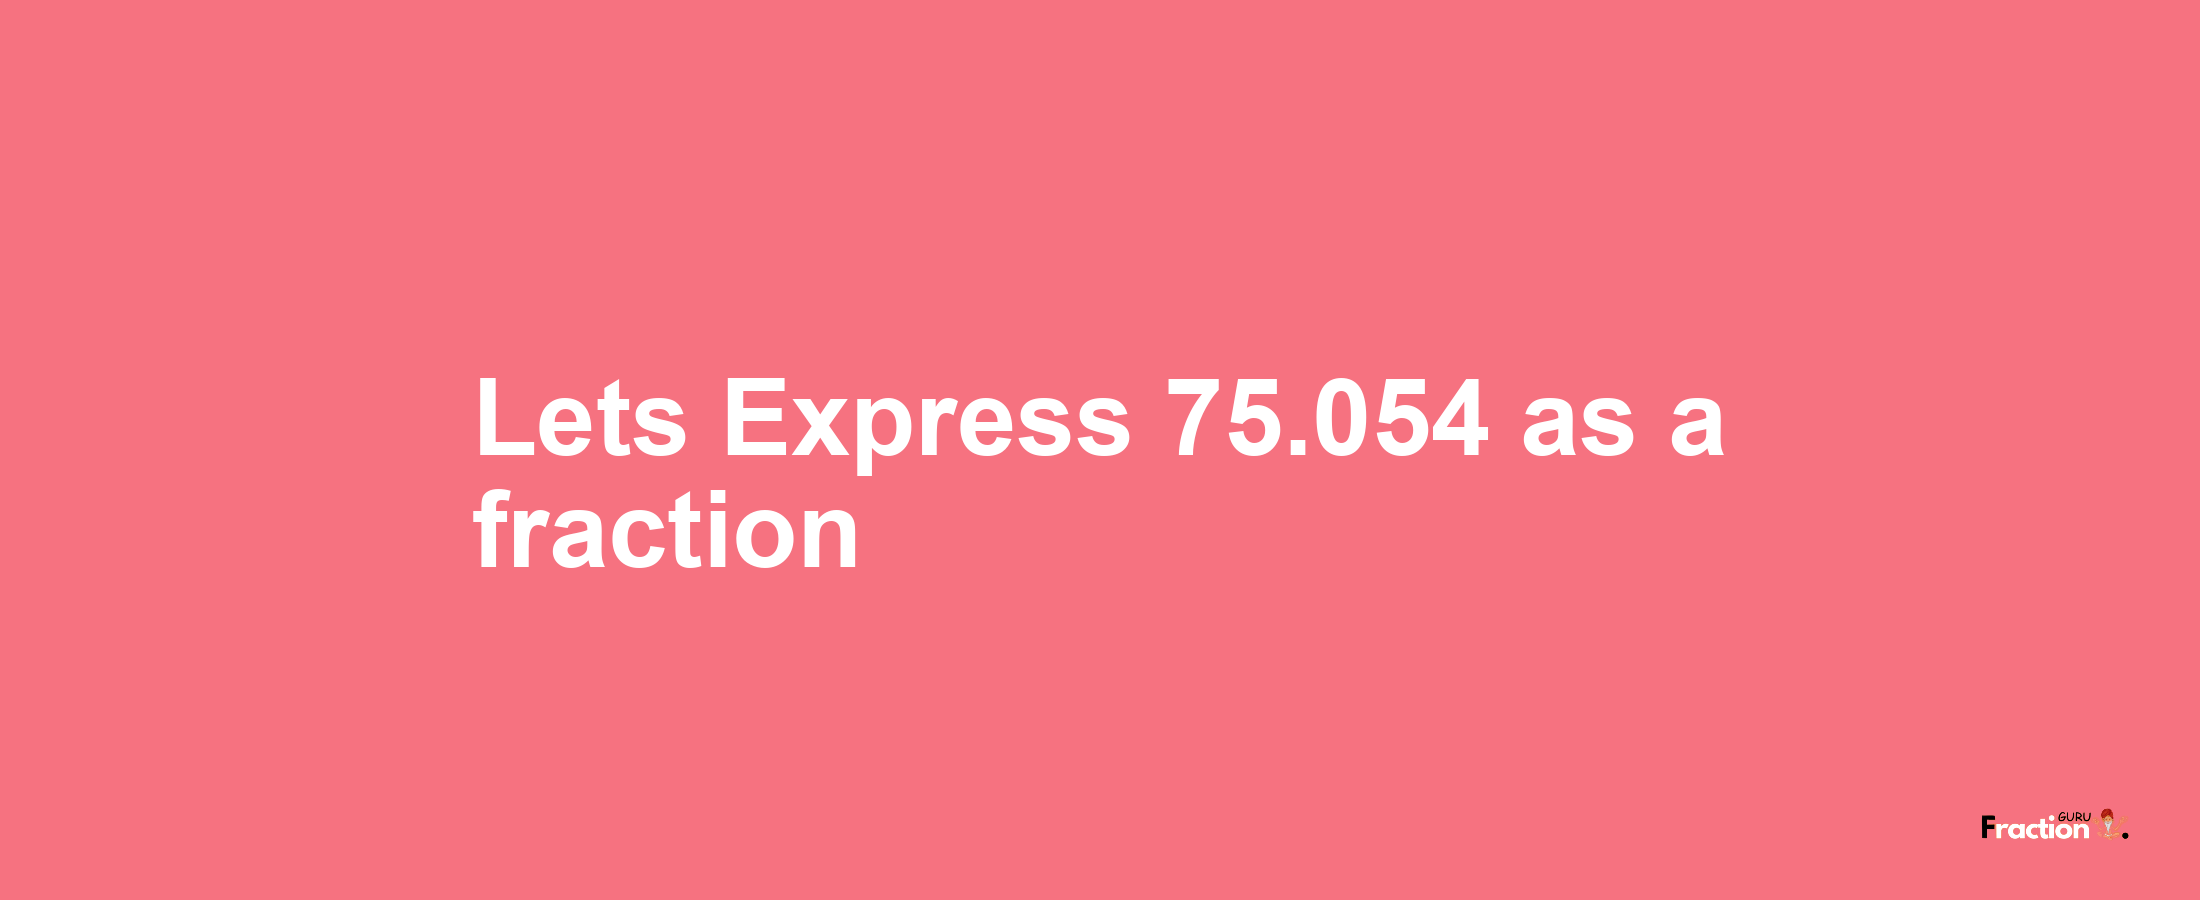 Lets Express 75.054 as afraction